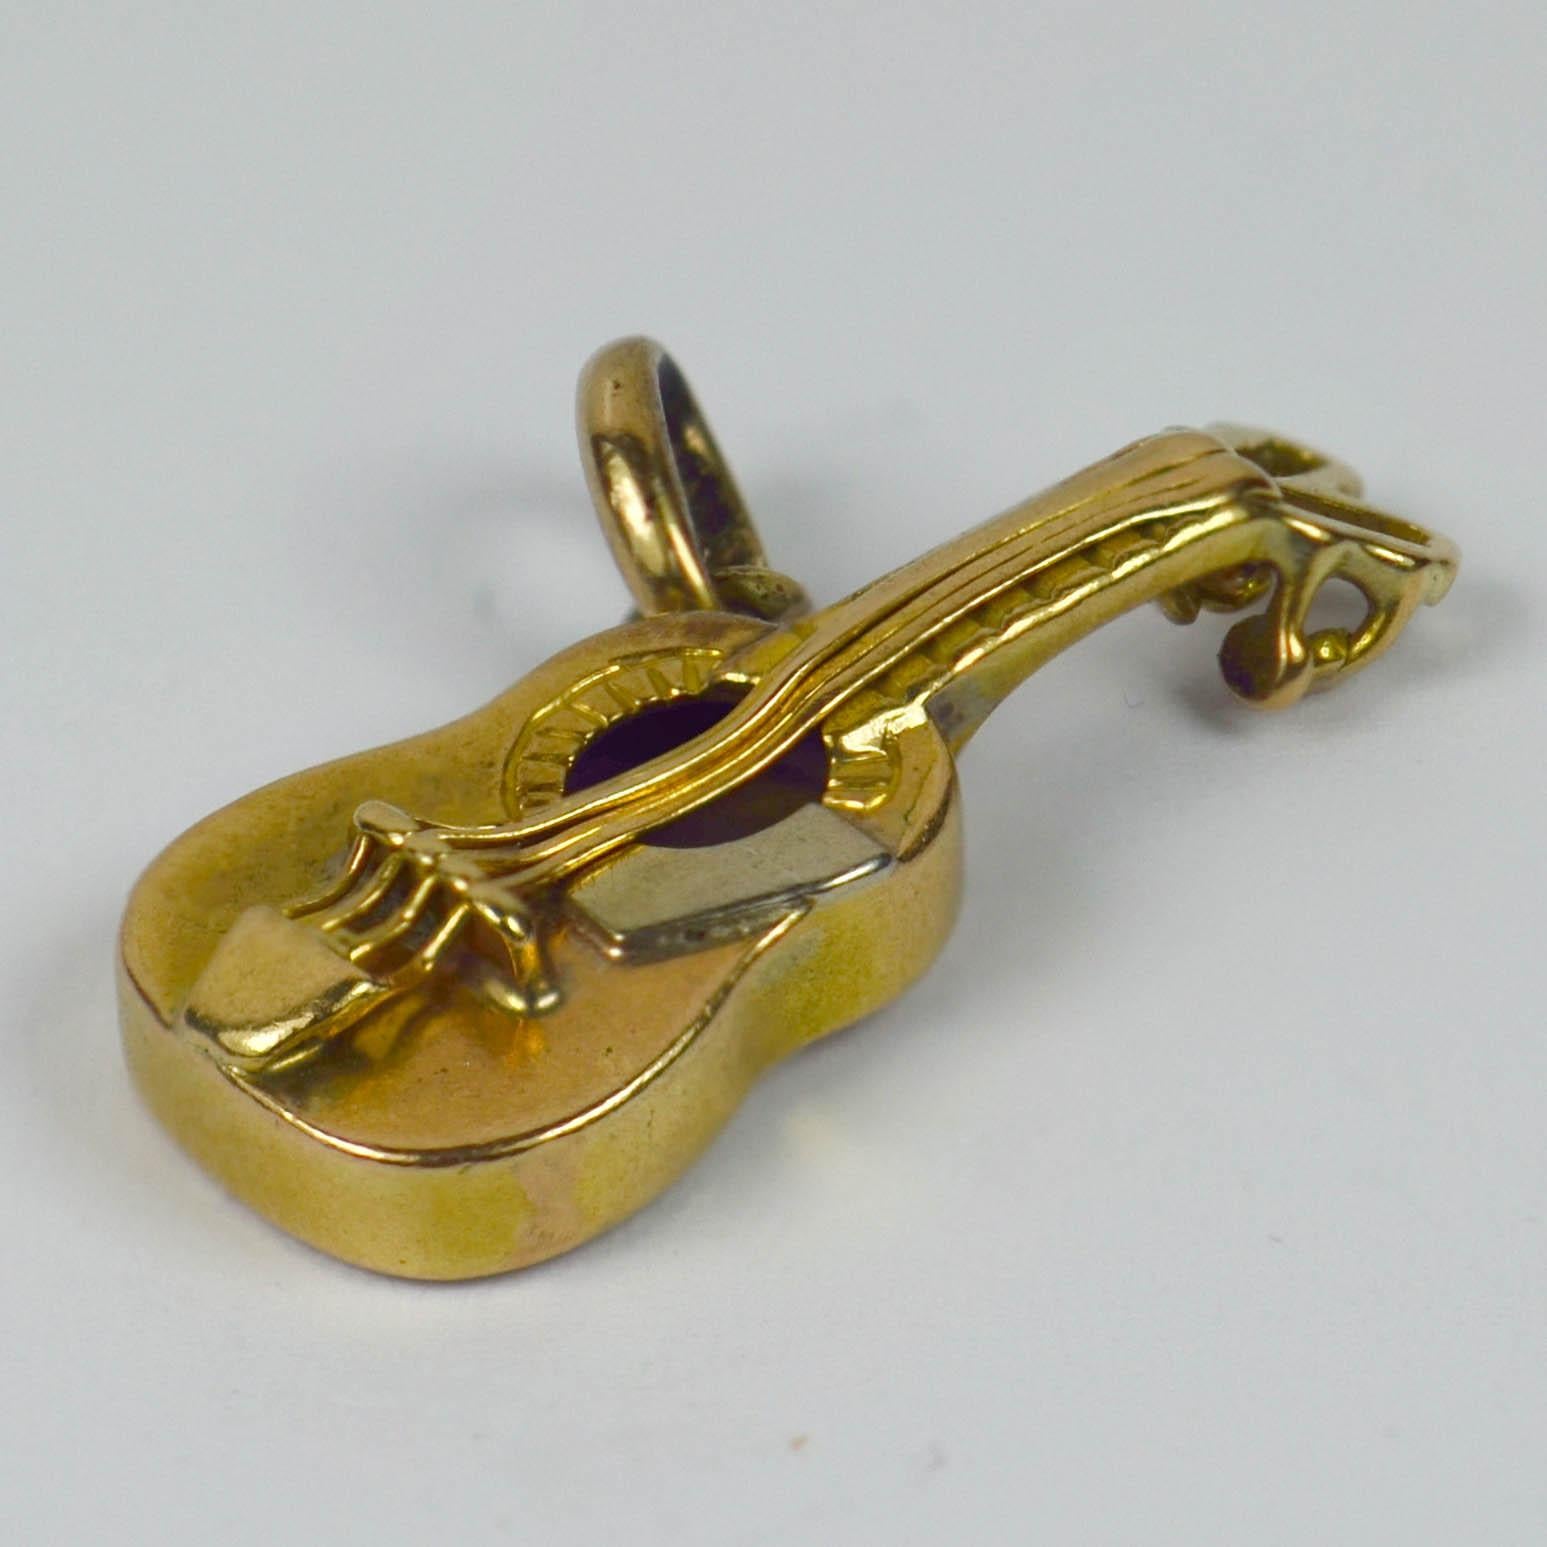 An 18 karat yellow and white gold charm pendant designed as a guitar. Stamped with French import marks for 18 karat gold.

Measurements: 2 x 1.2 x 0.3 cm
Weight: 1.31 grams